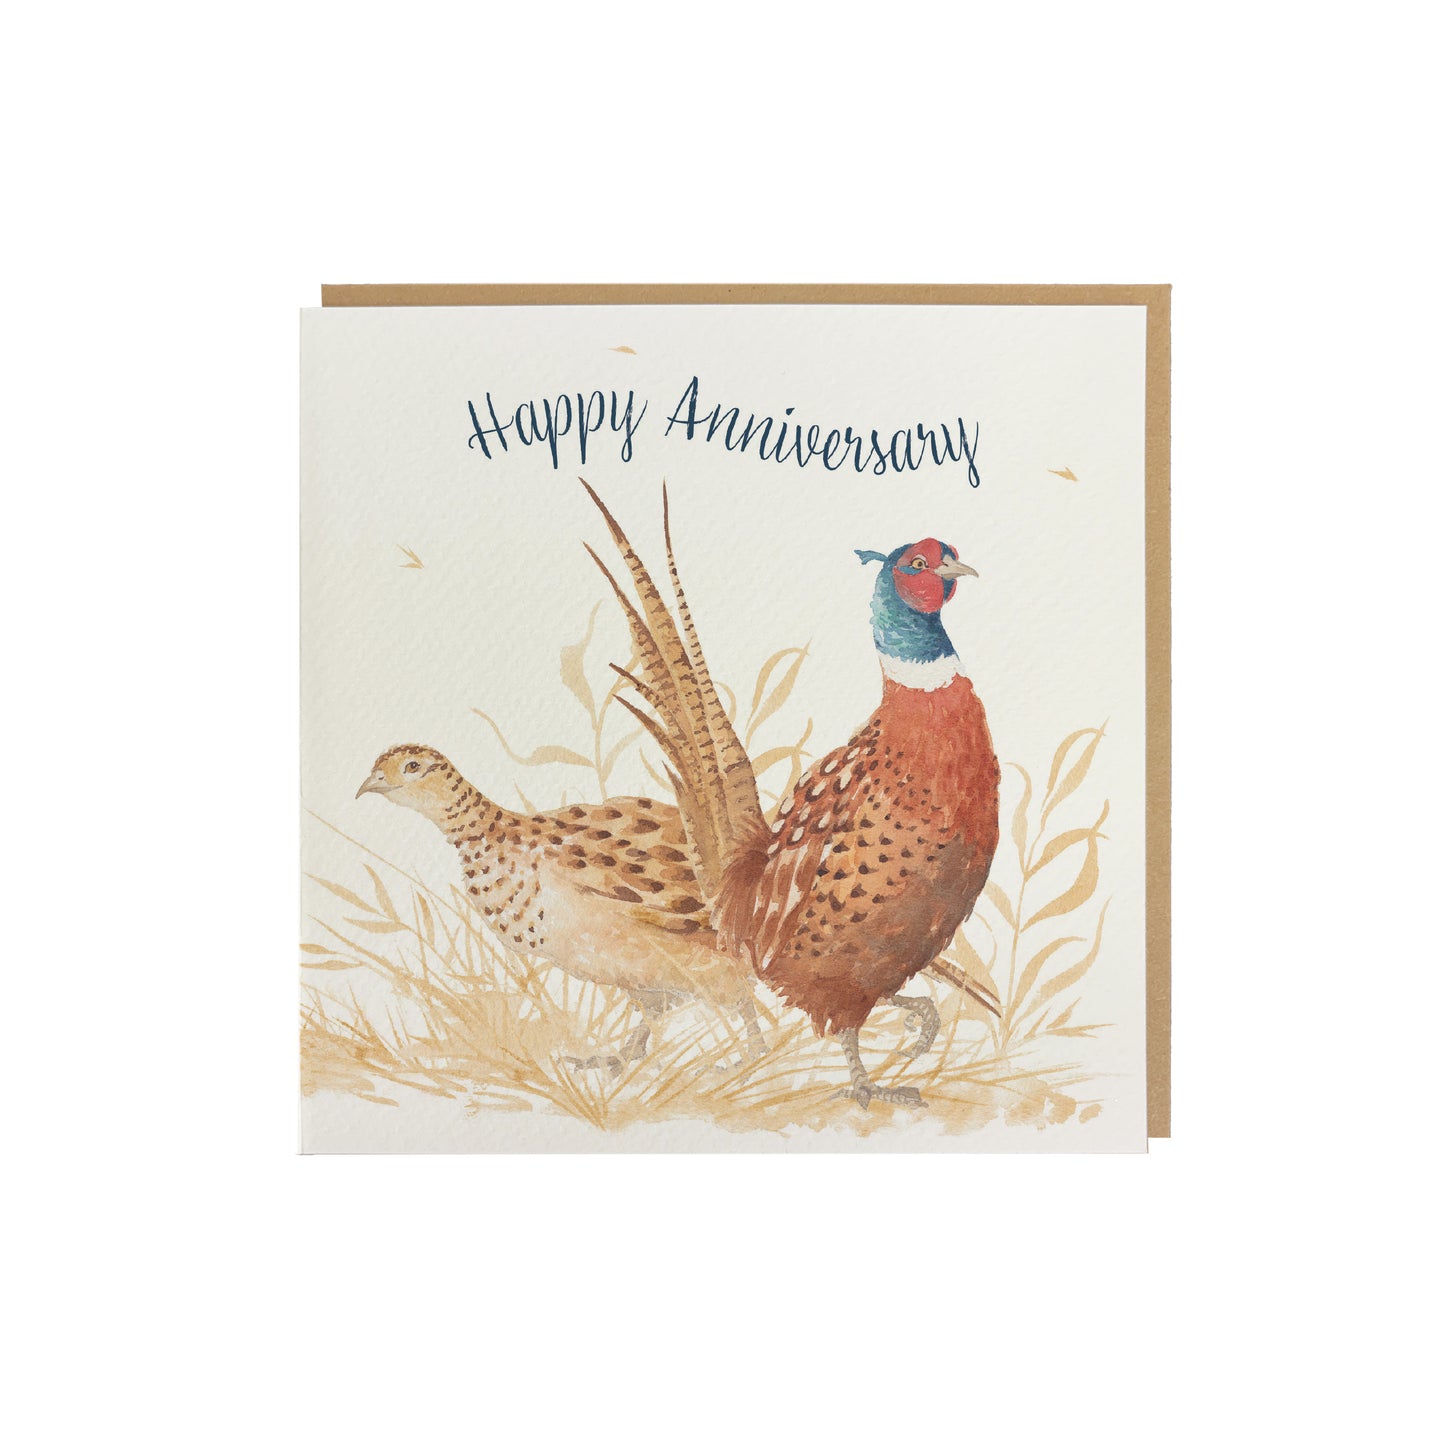 A greetings card reading Happy Anniversary in dark blue text above a male and female pheasant couple in a watercolour style. The card has a recyclable brown kraft envelope behind it.